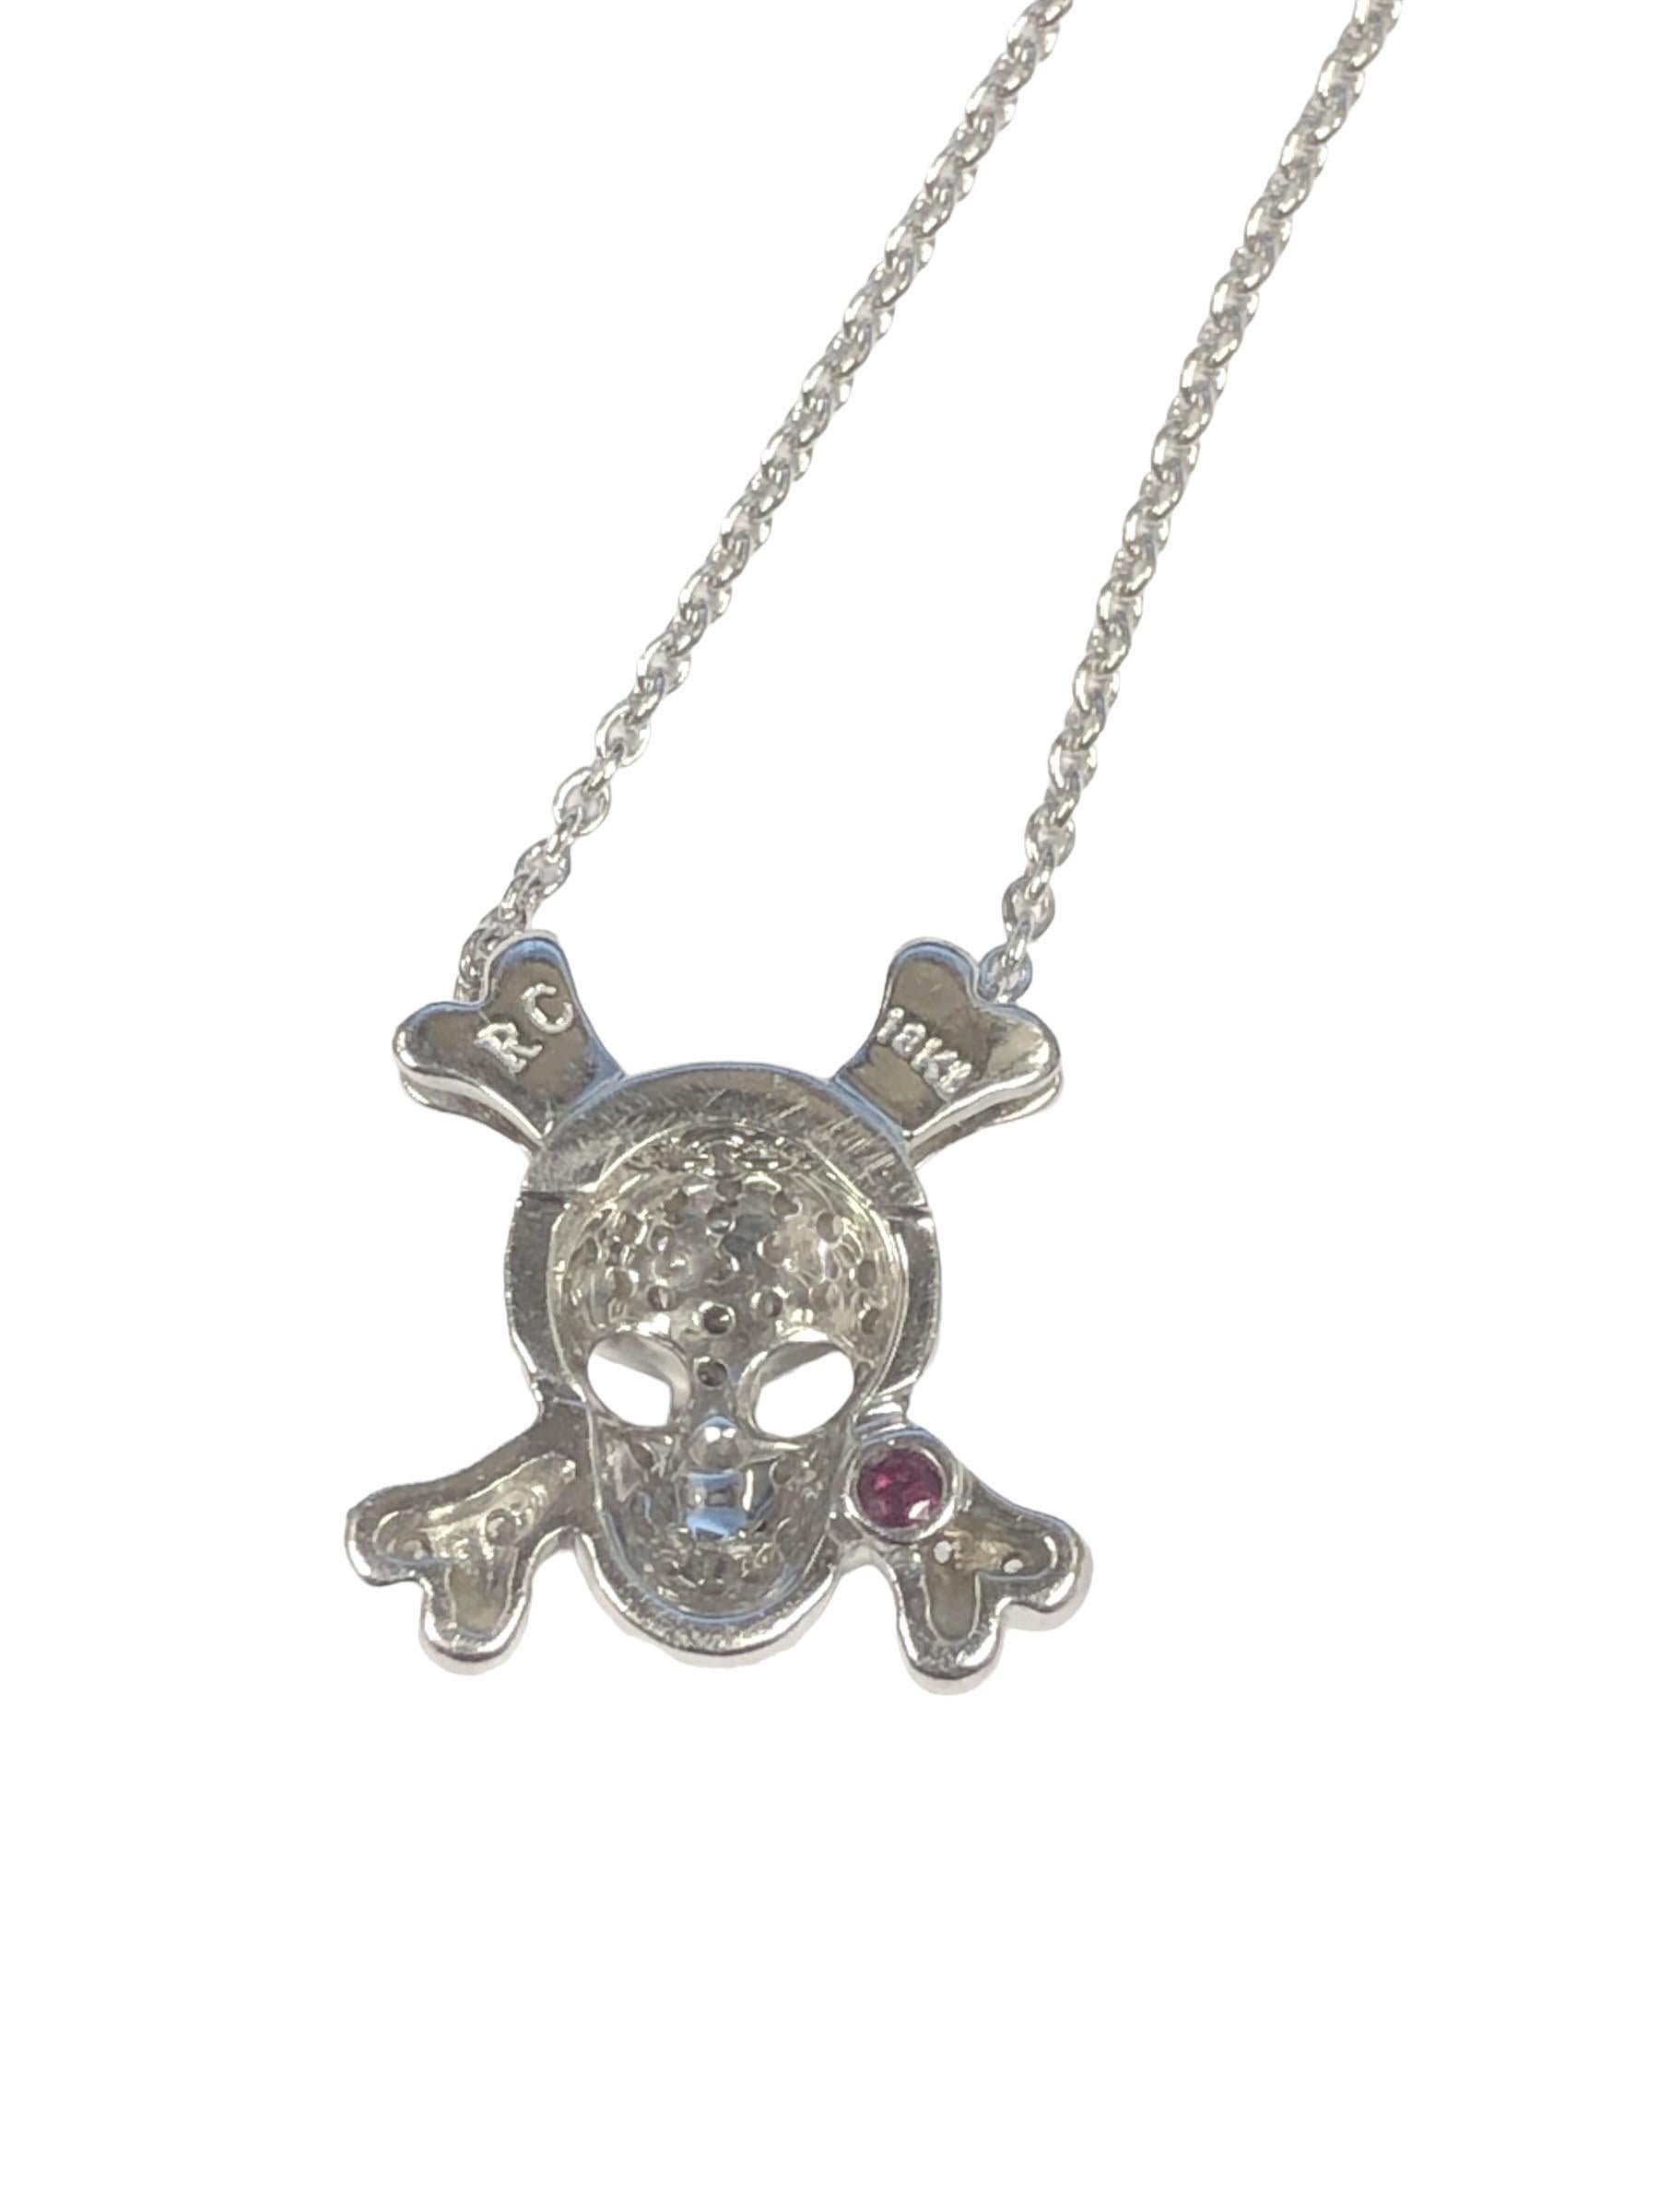 Circa 2020 Roberto Coin Tiny Treasures collection, 18k White Gold Skull and Cross Bones Pendant Necklace. Measuring 1/2 x 1/2 inch and suspended from an 18 inch chain, set with .20 Carat of Round Brilliant cut Diamonds. 